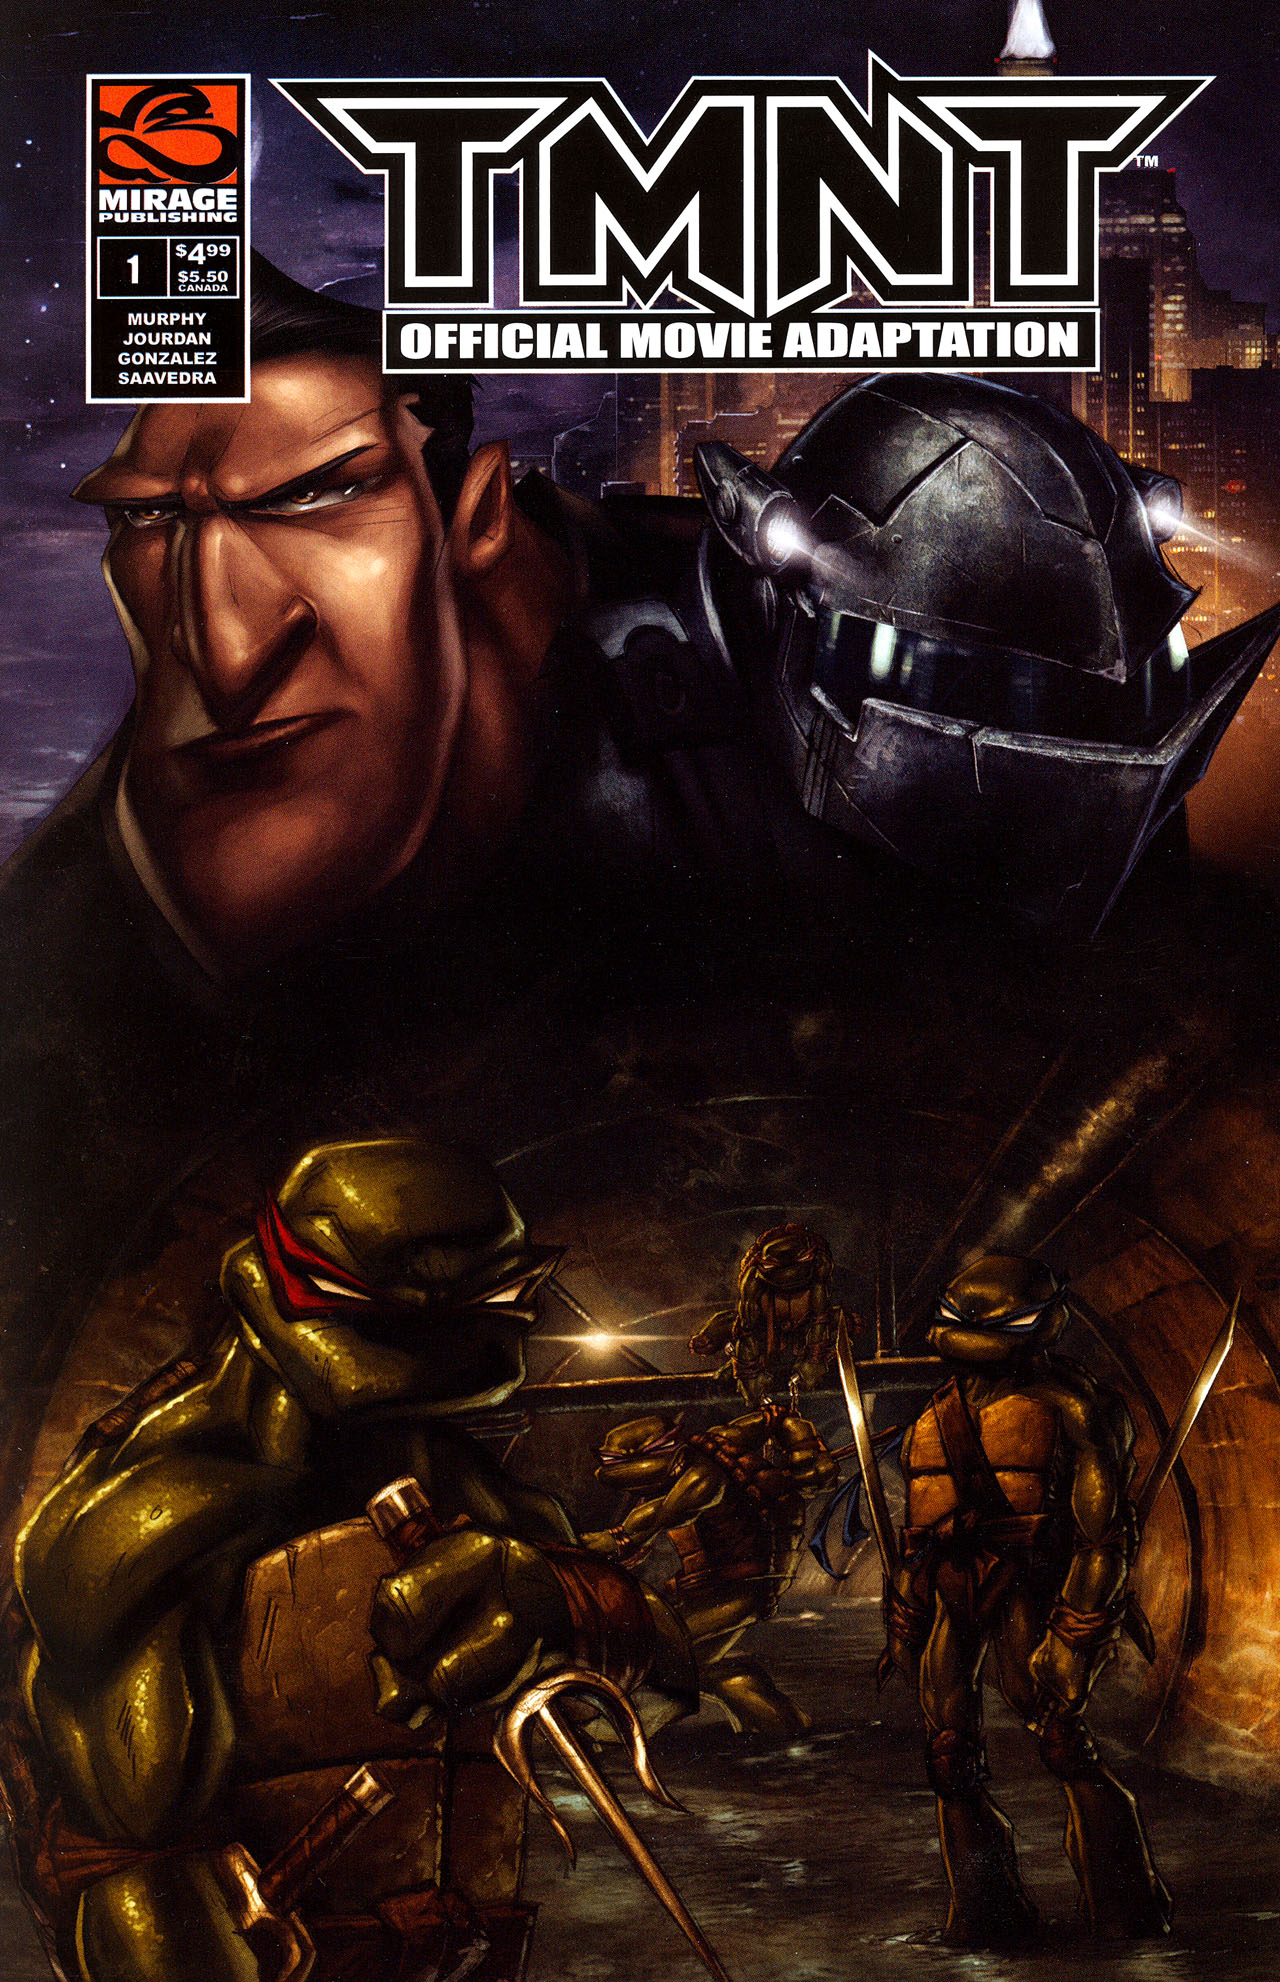 Read online TMNT: The Official Movie Adaptation comic -  Issue # Full - 1